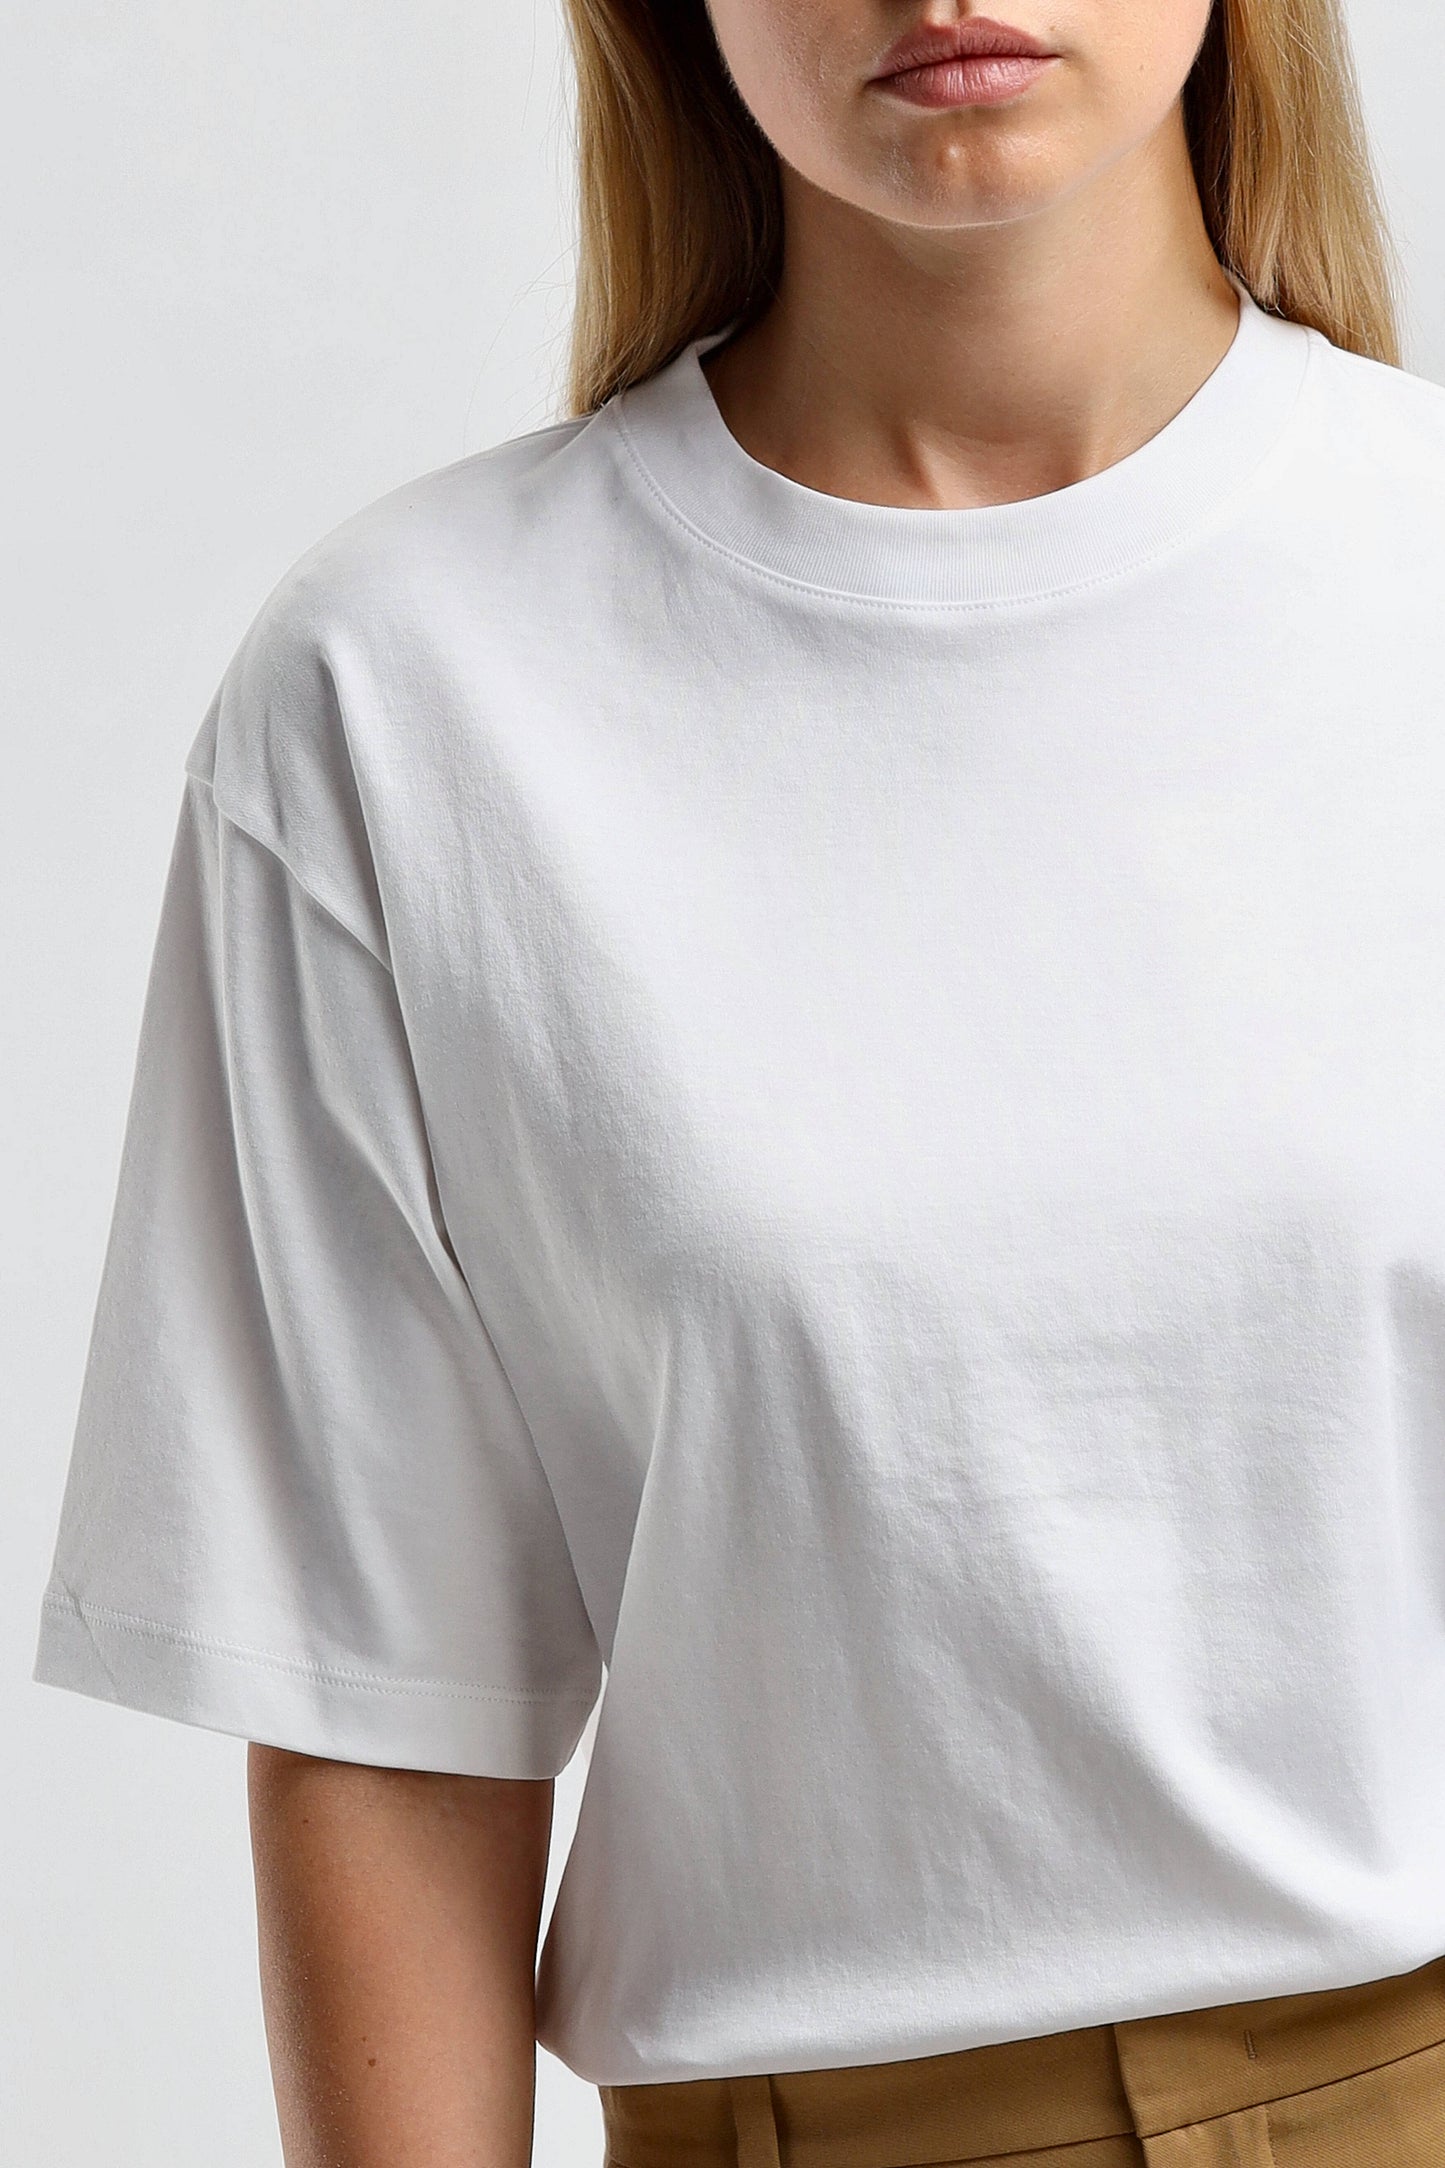 T-Shirt Wide in Optic WhiteVince - Anita Hass